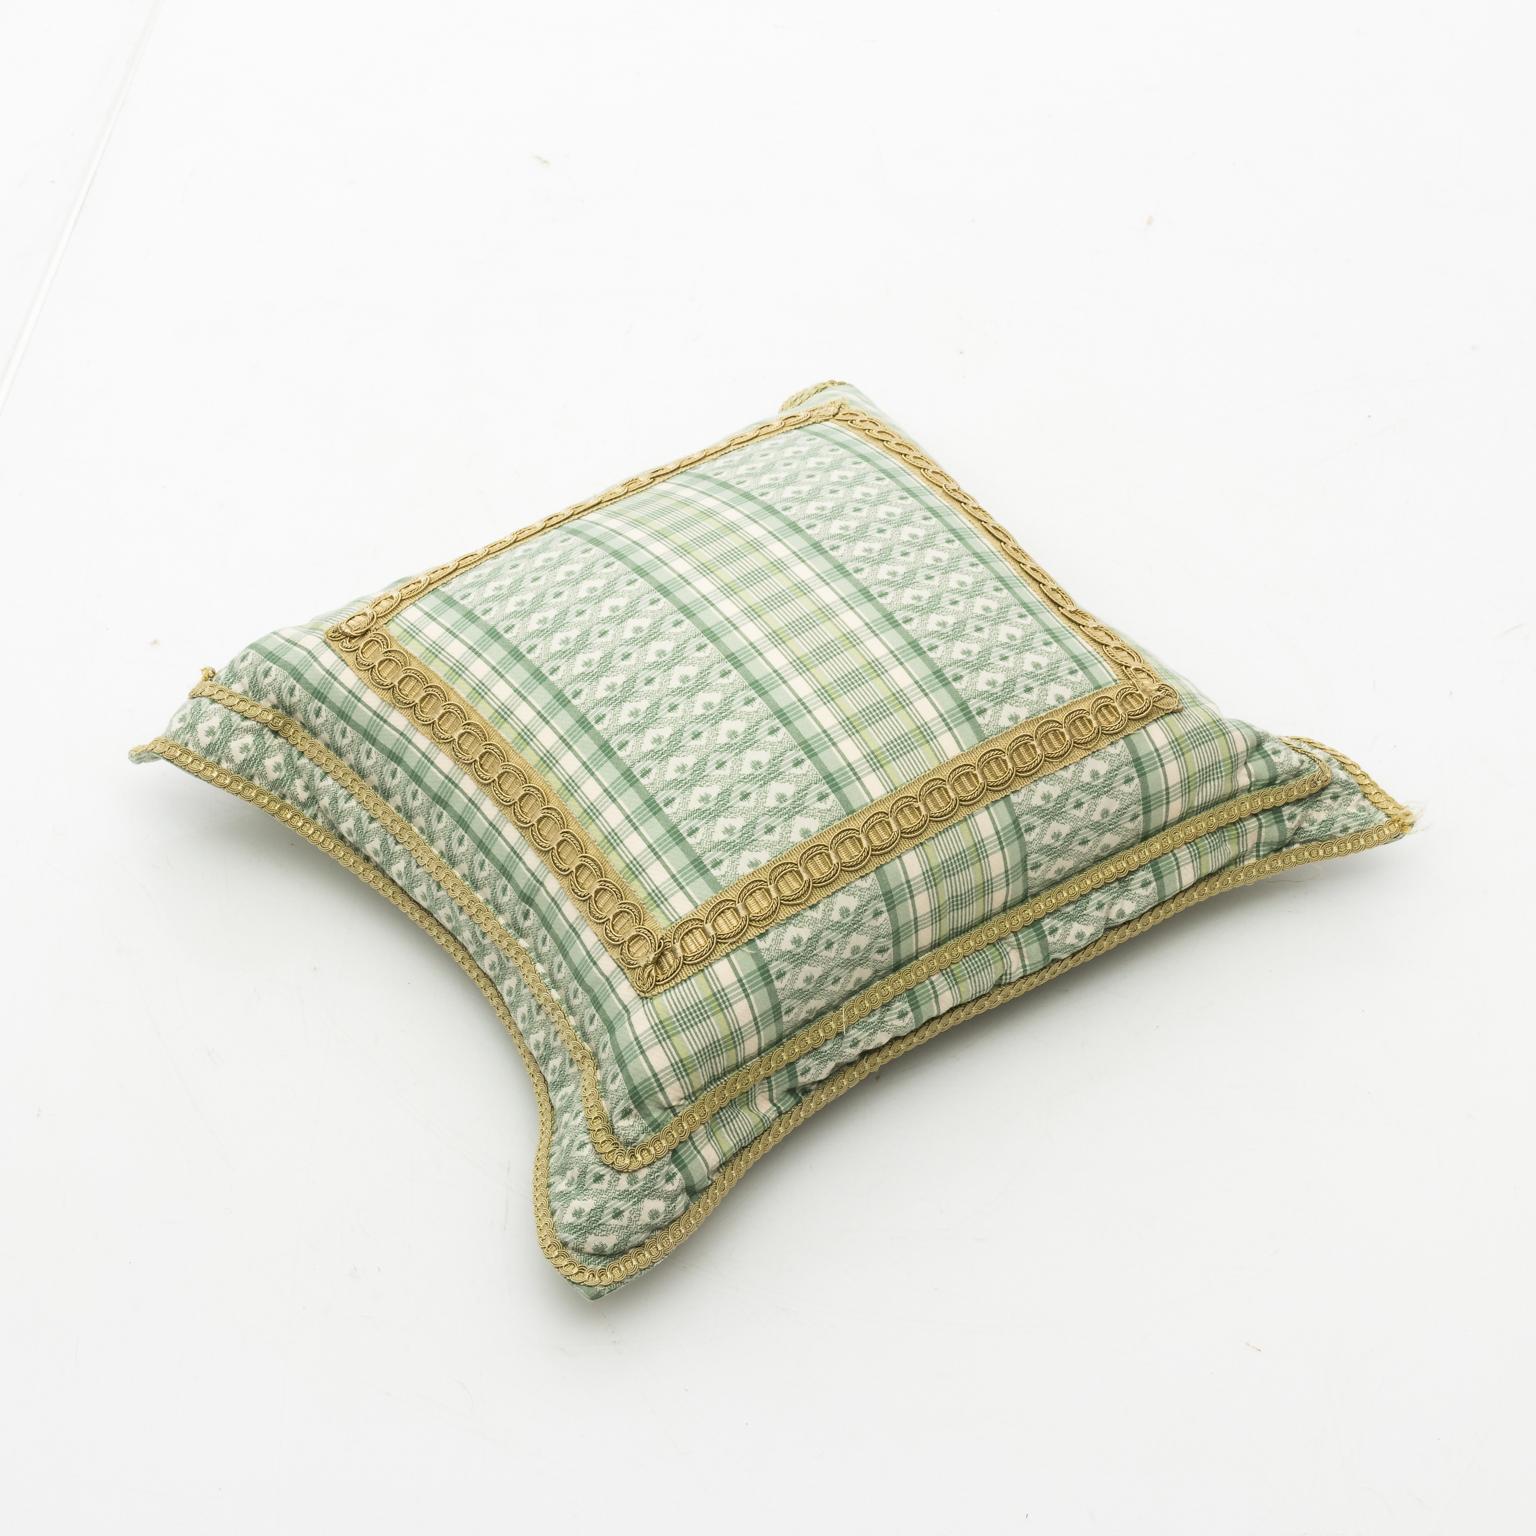 Fabric Decorative Green and White Pillows